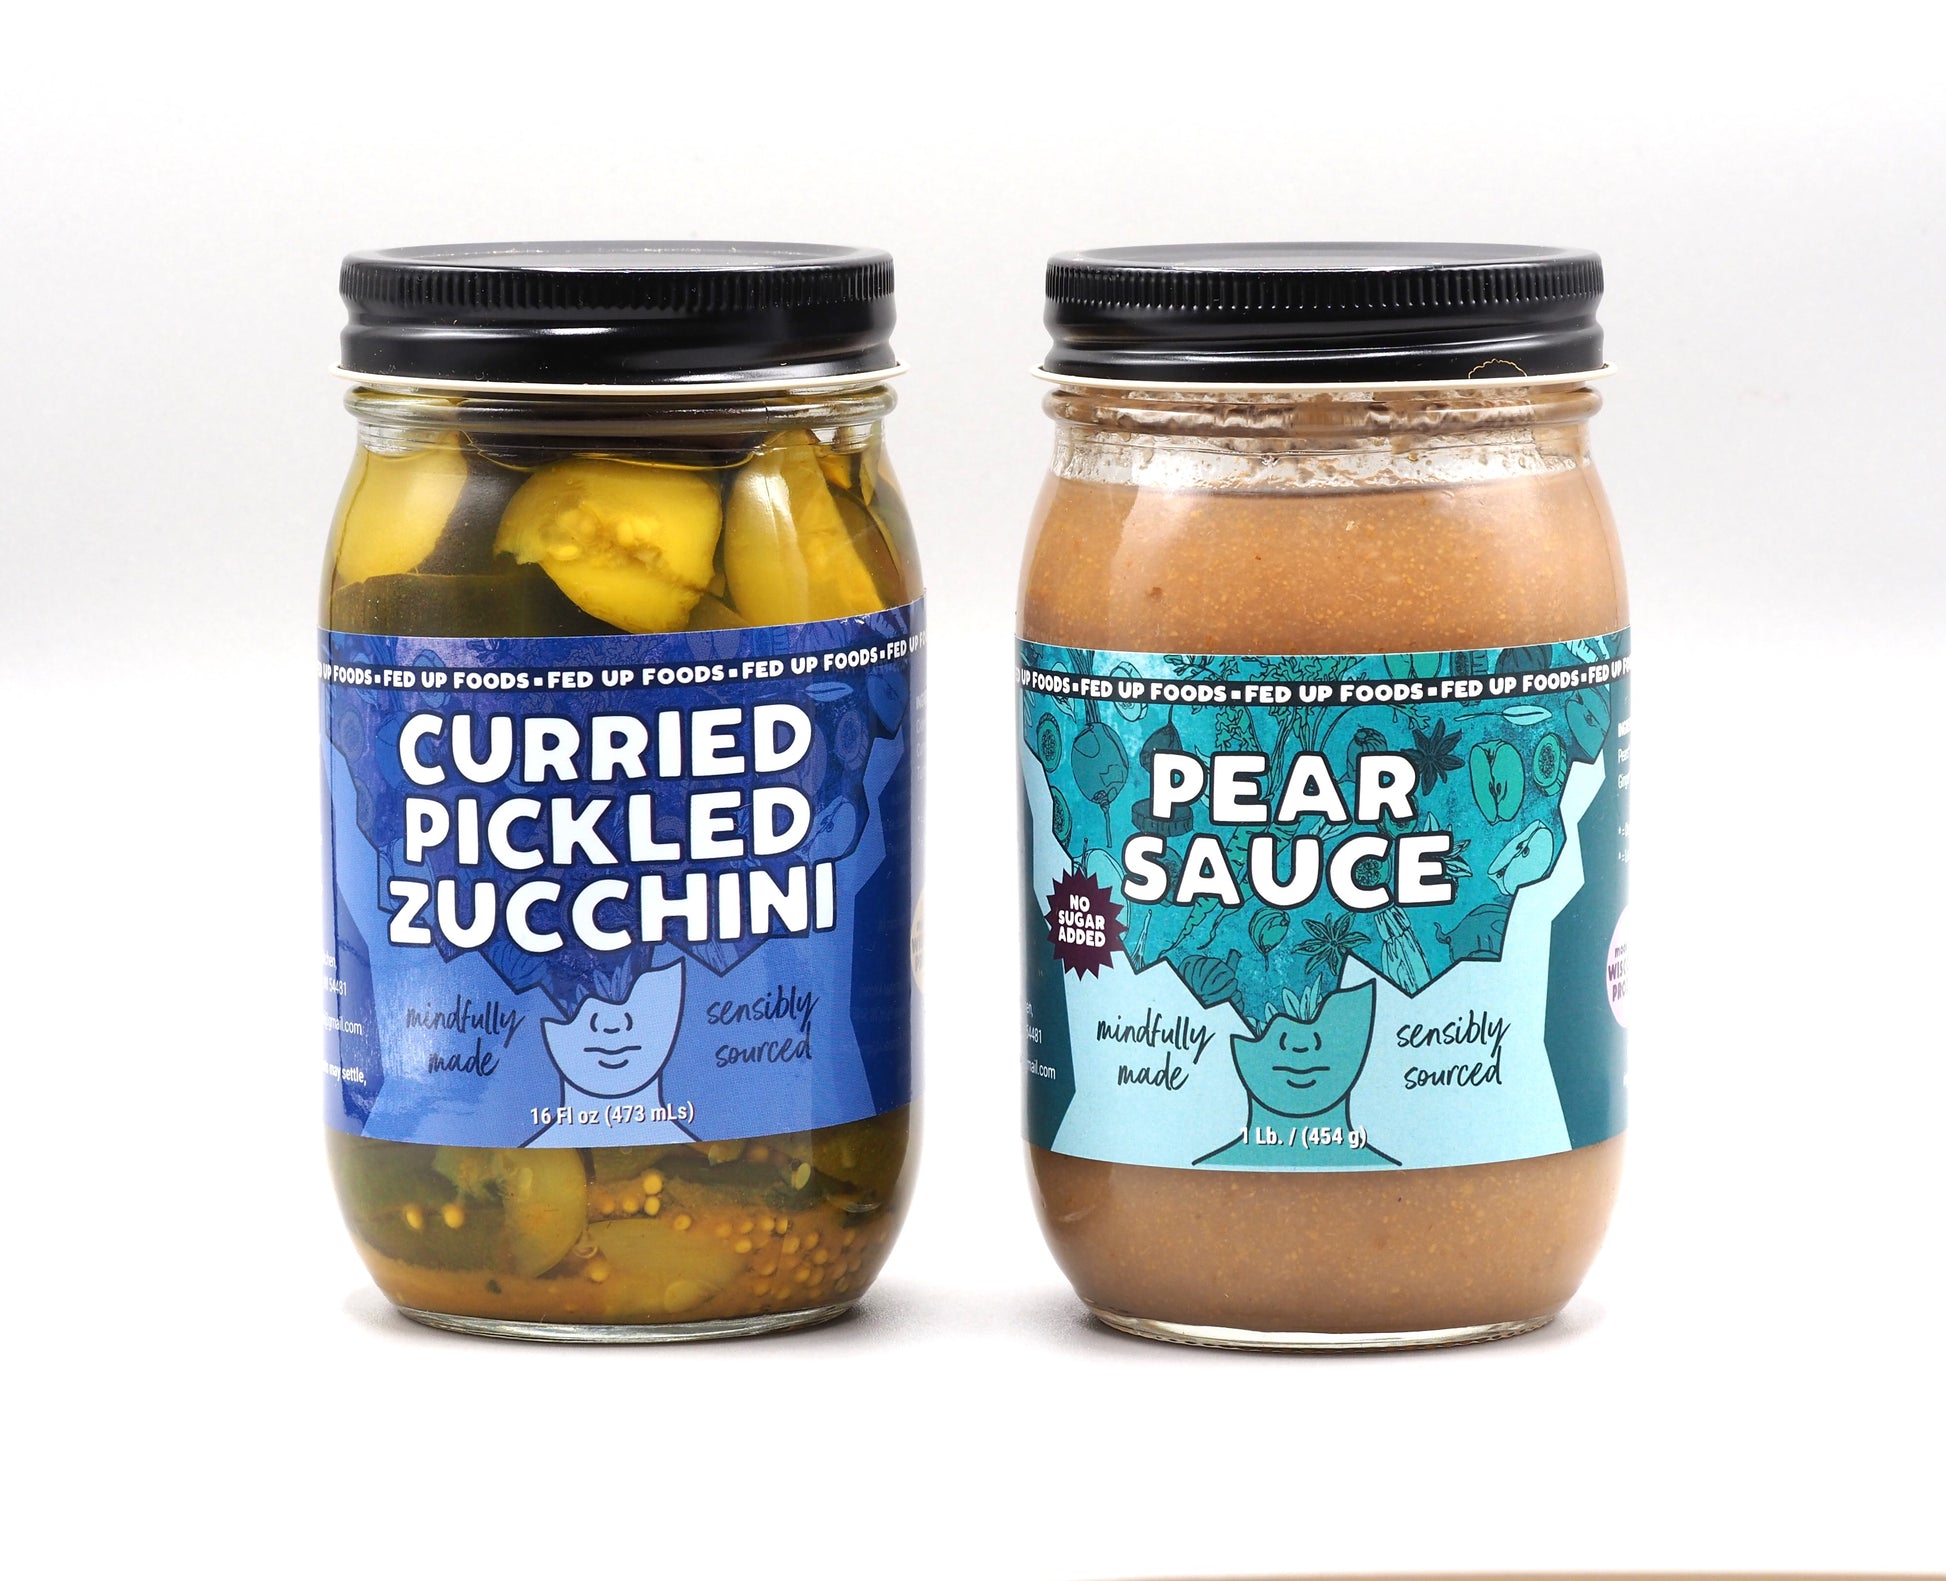 Fed Up Foods Curried Pickled Zucchini and Pear Sauce in a build your own variety pack